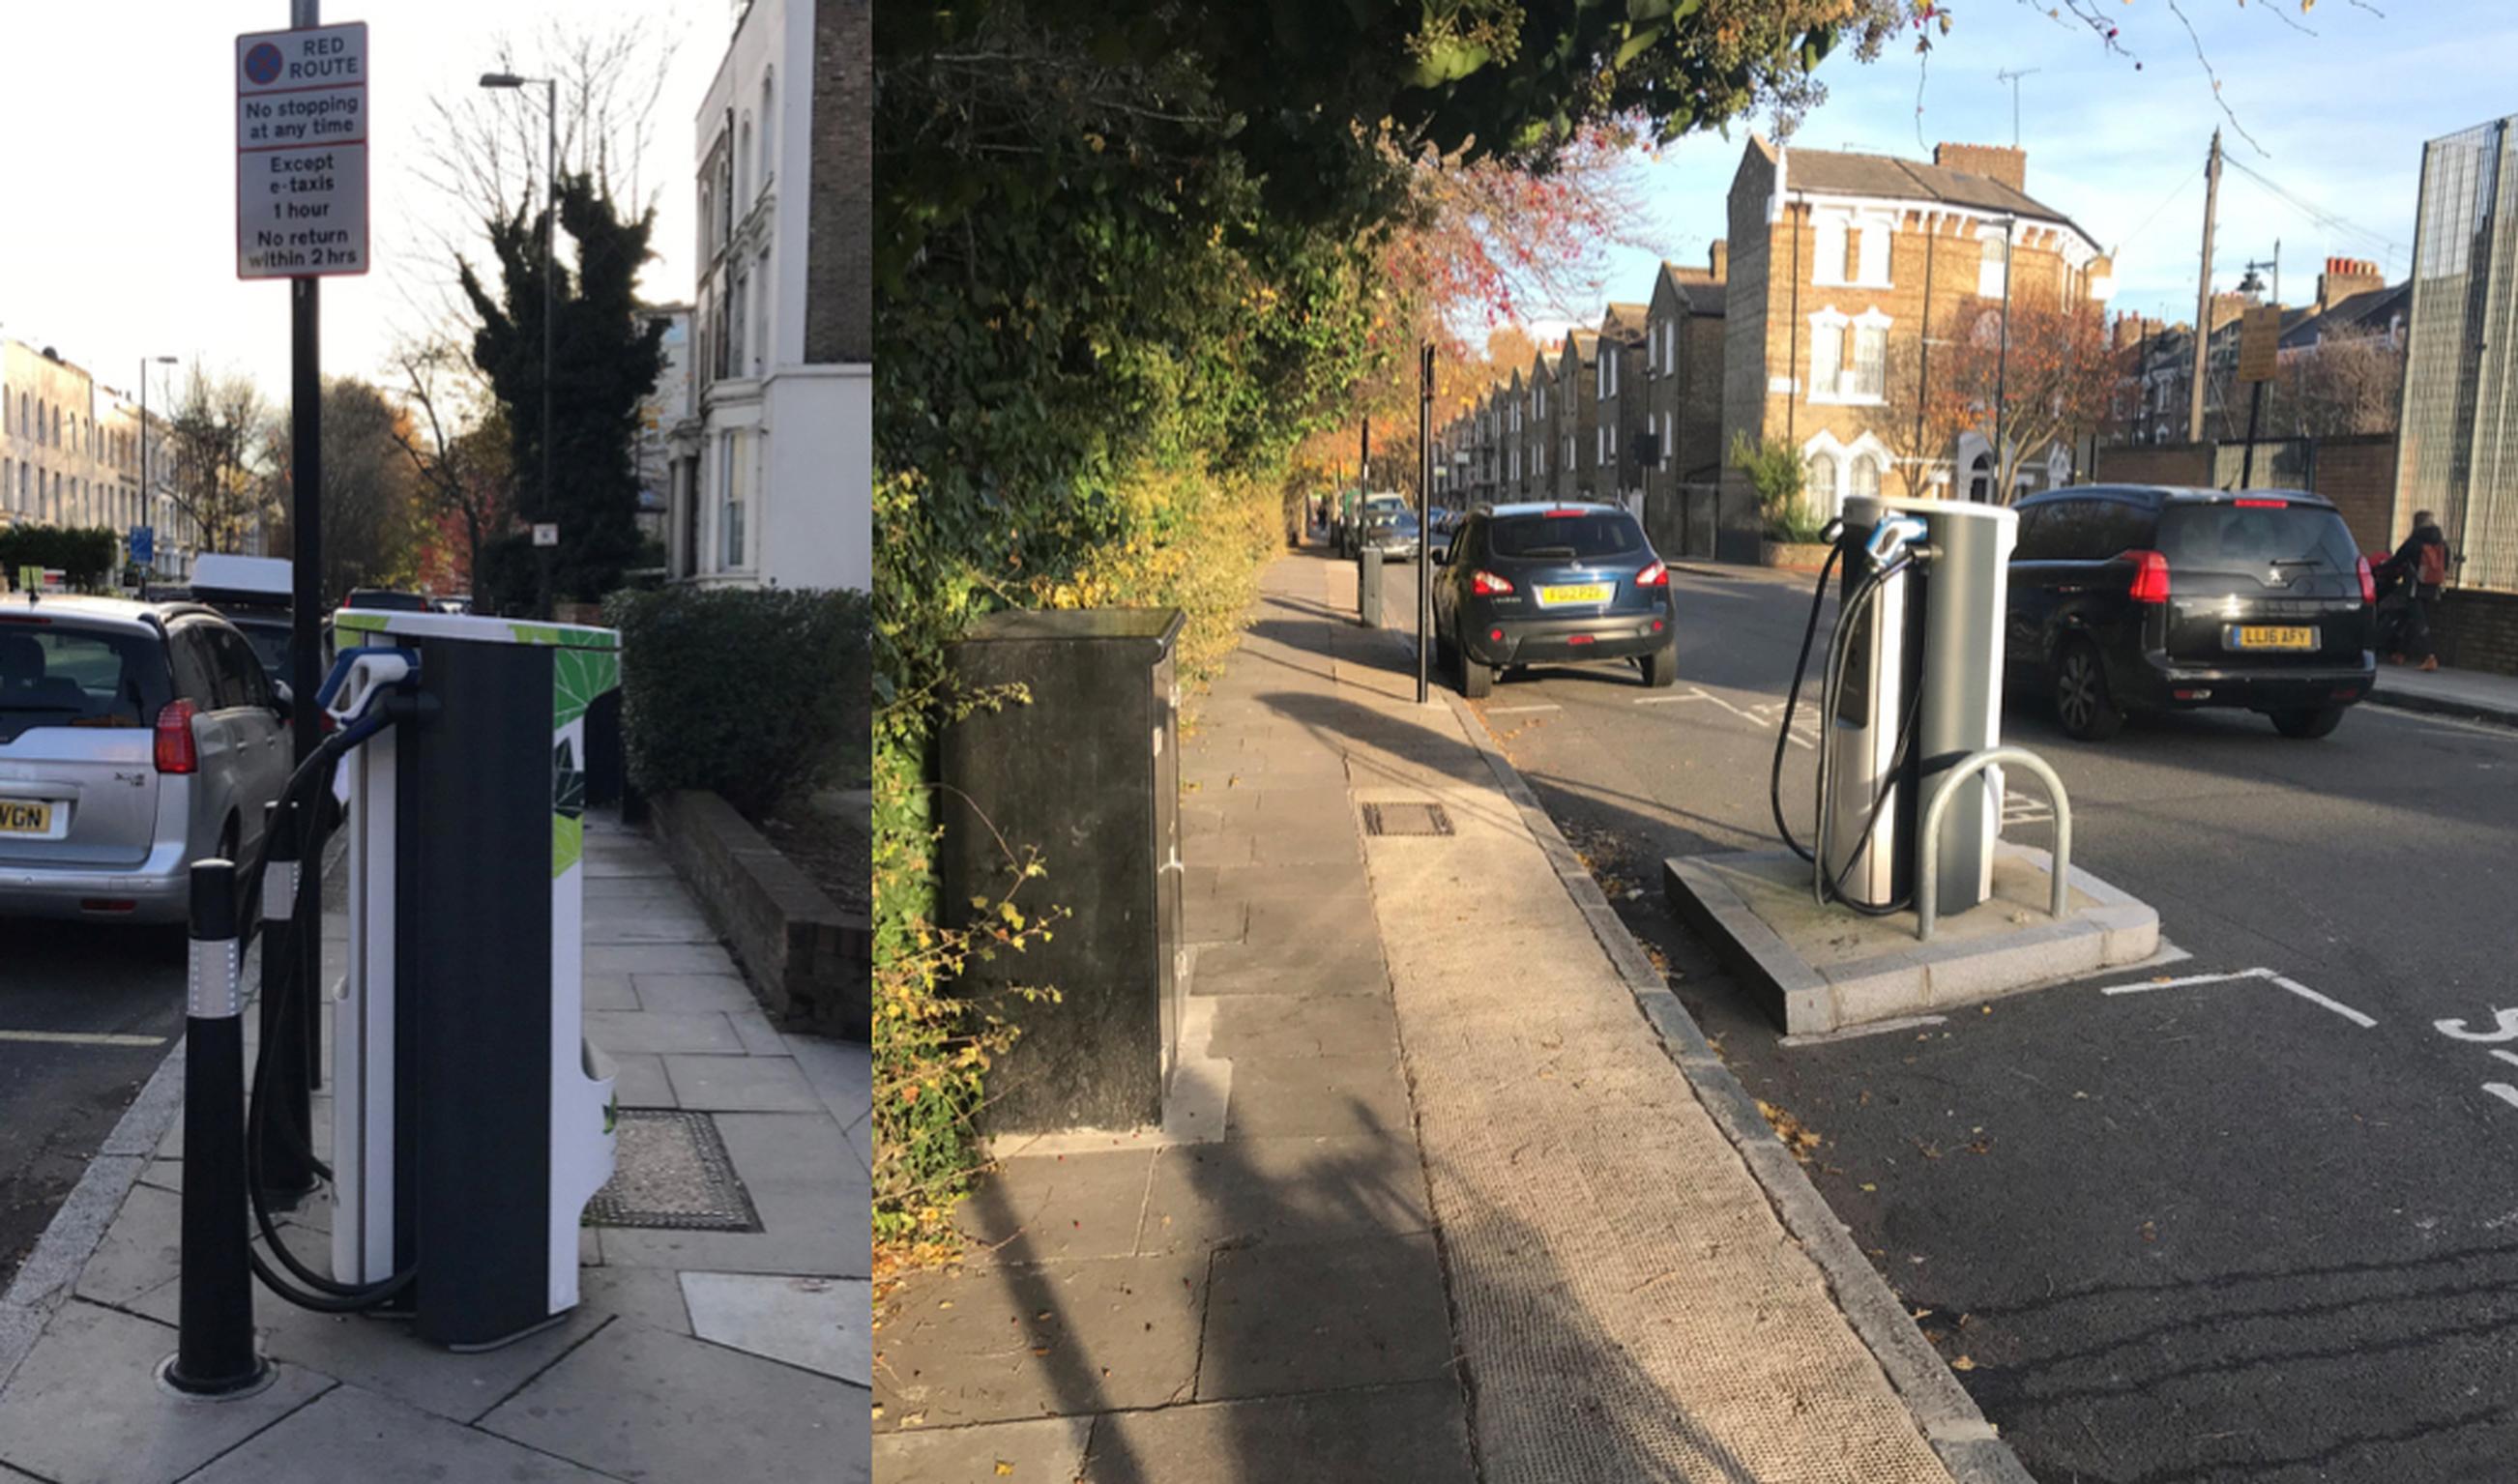 A footway blocked by an electric vehicle charger (left) and one placed on a kerbside build-out (right)